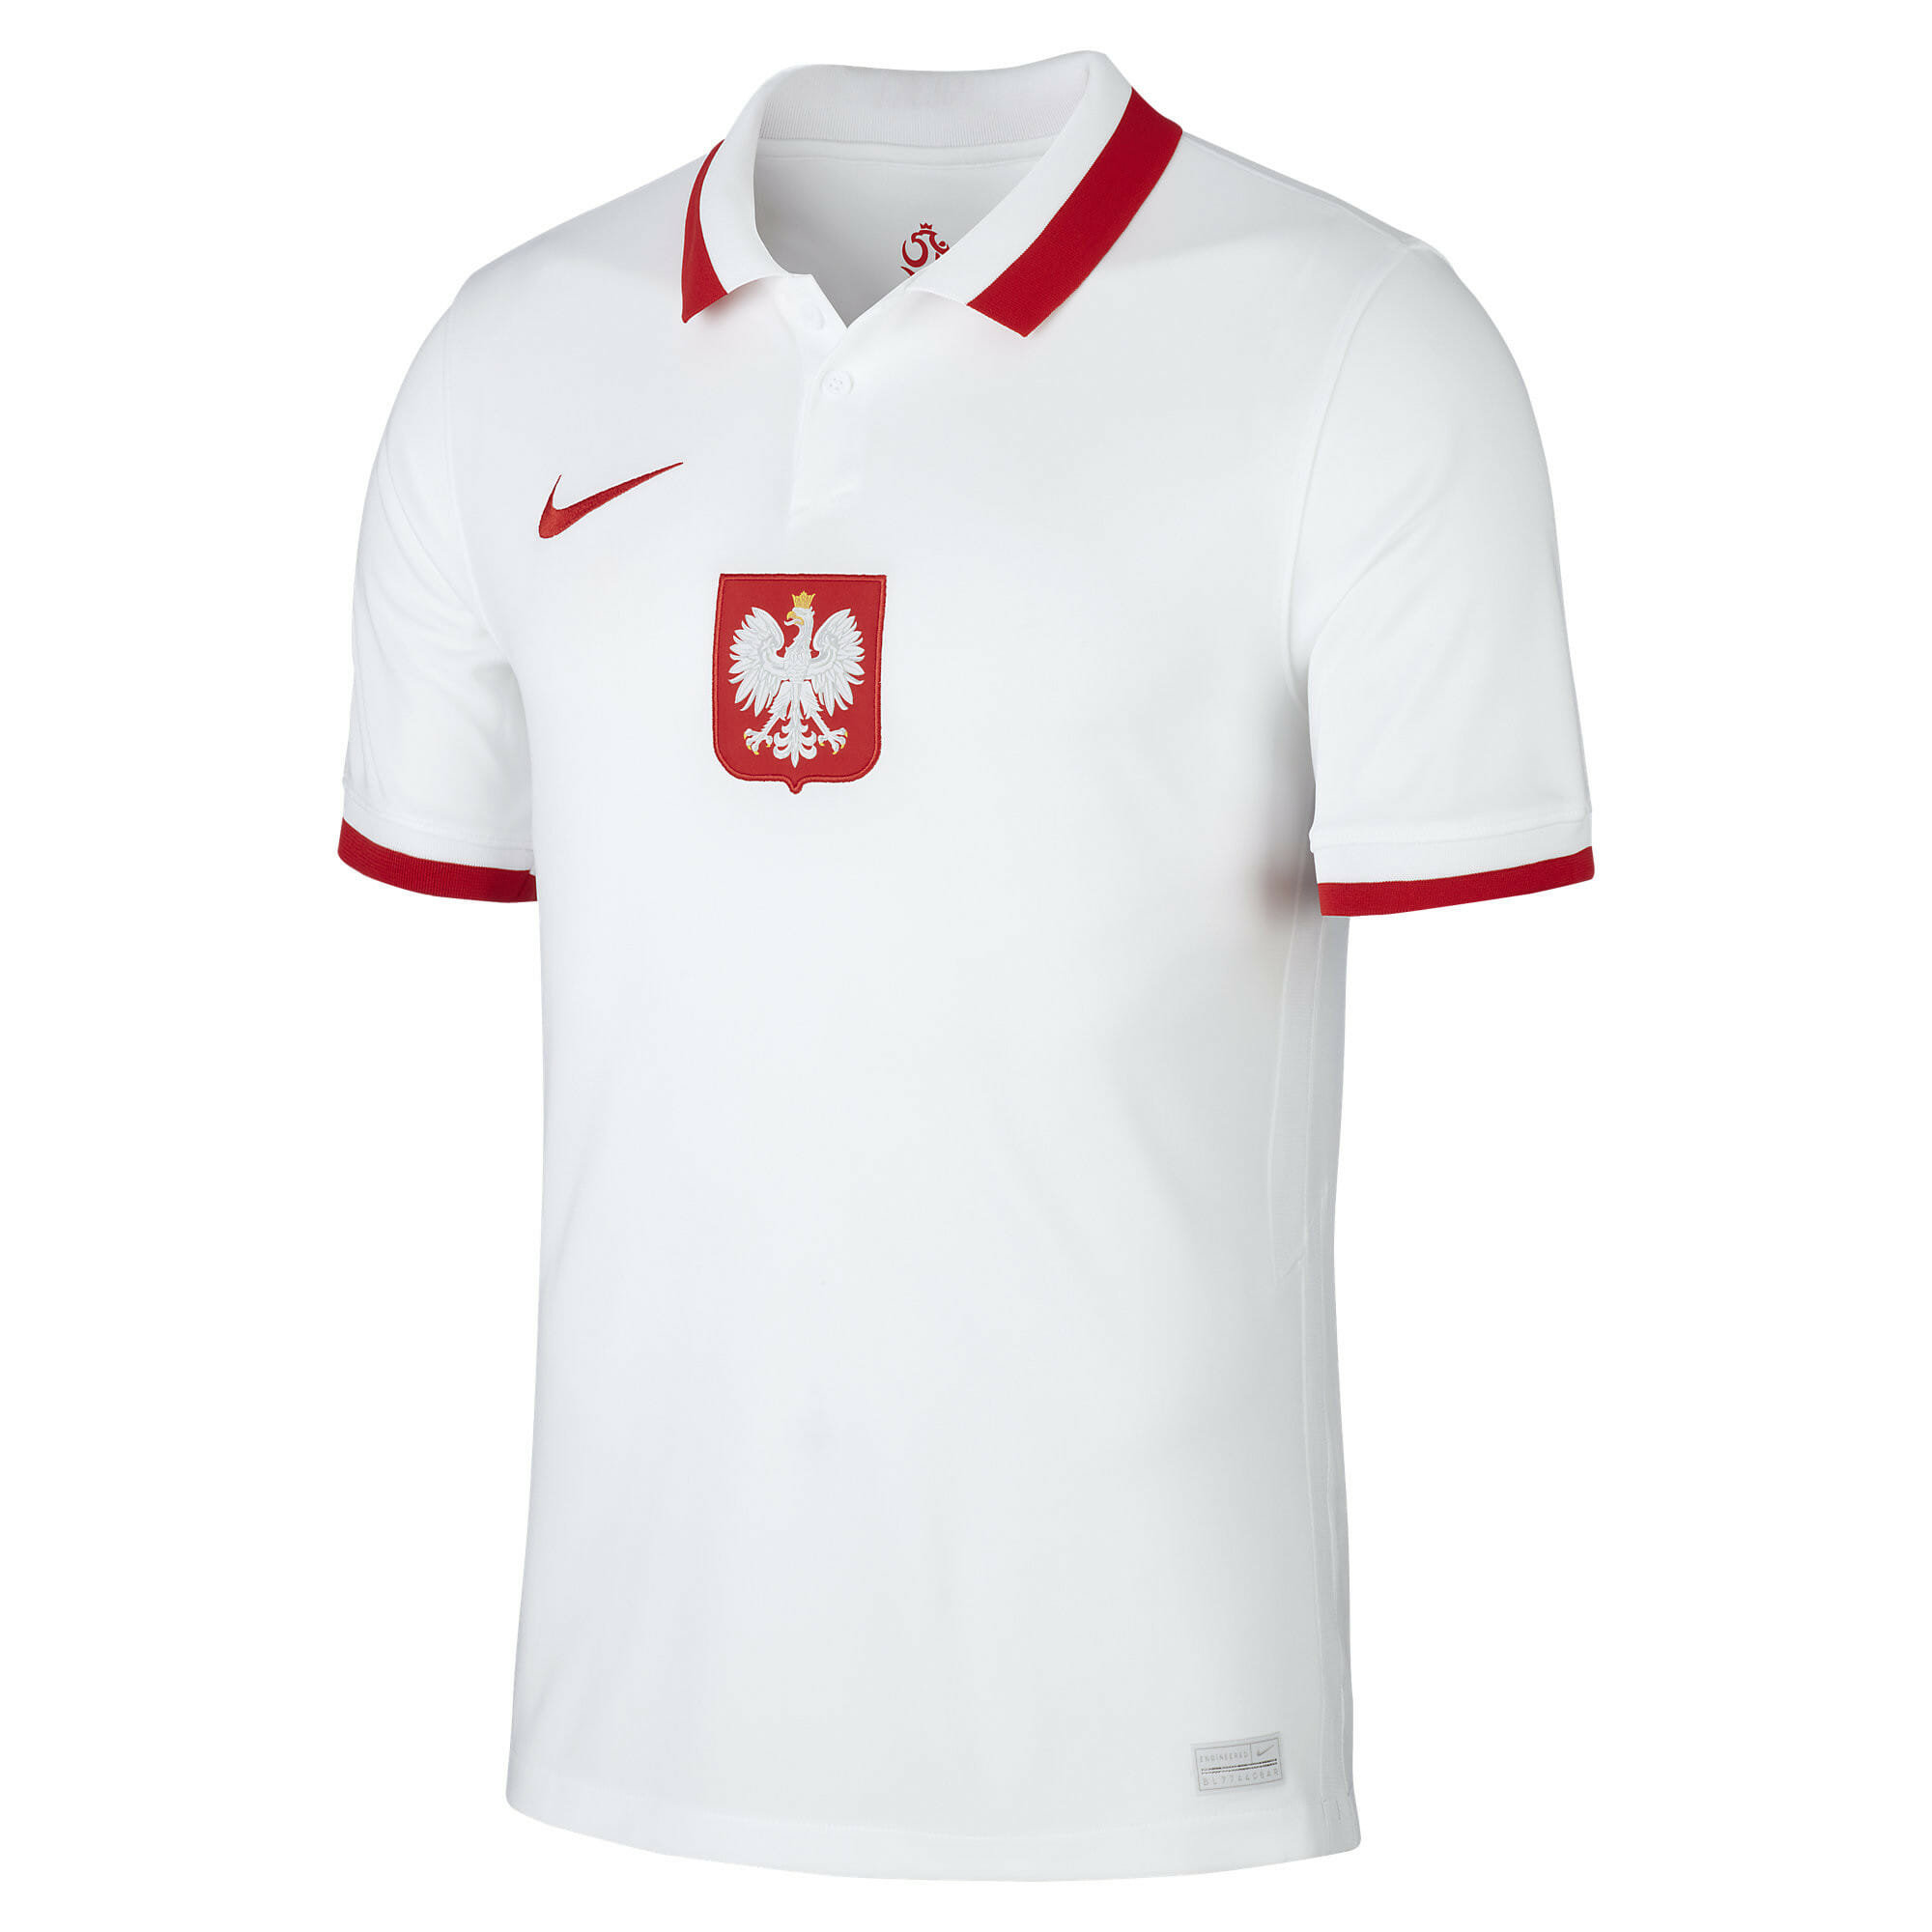  Poland National Team Hockey Jersey Any Name Number